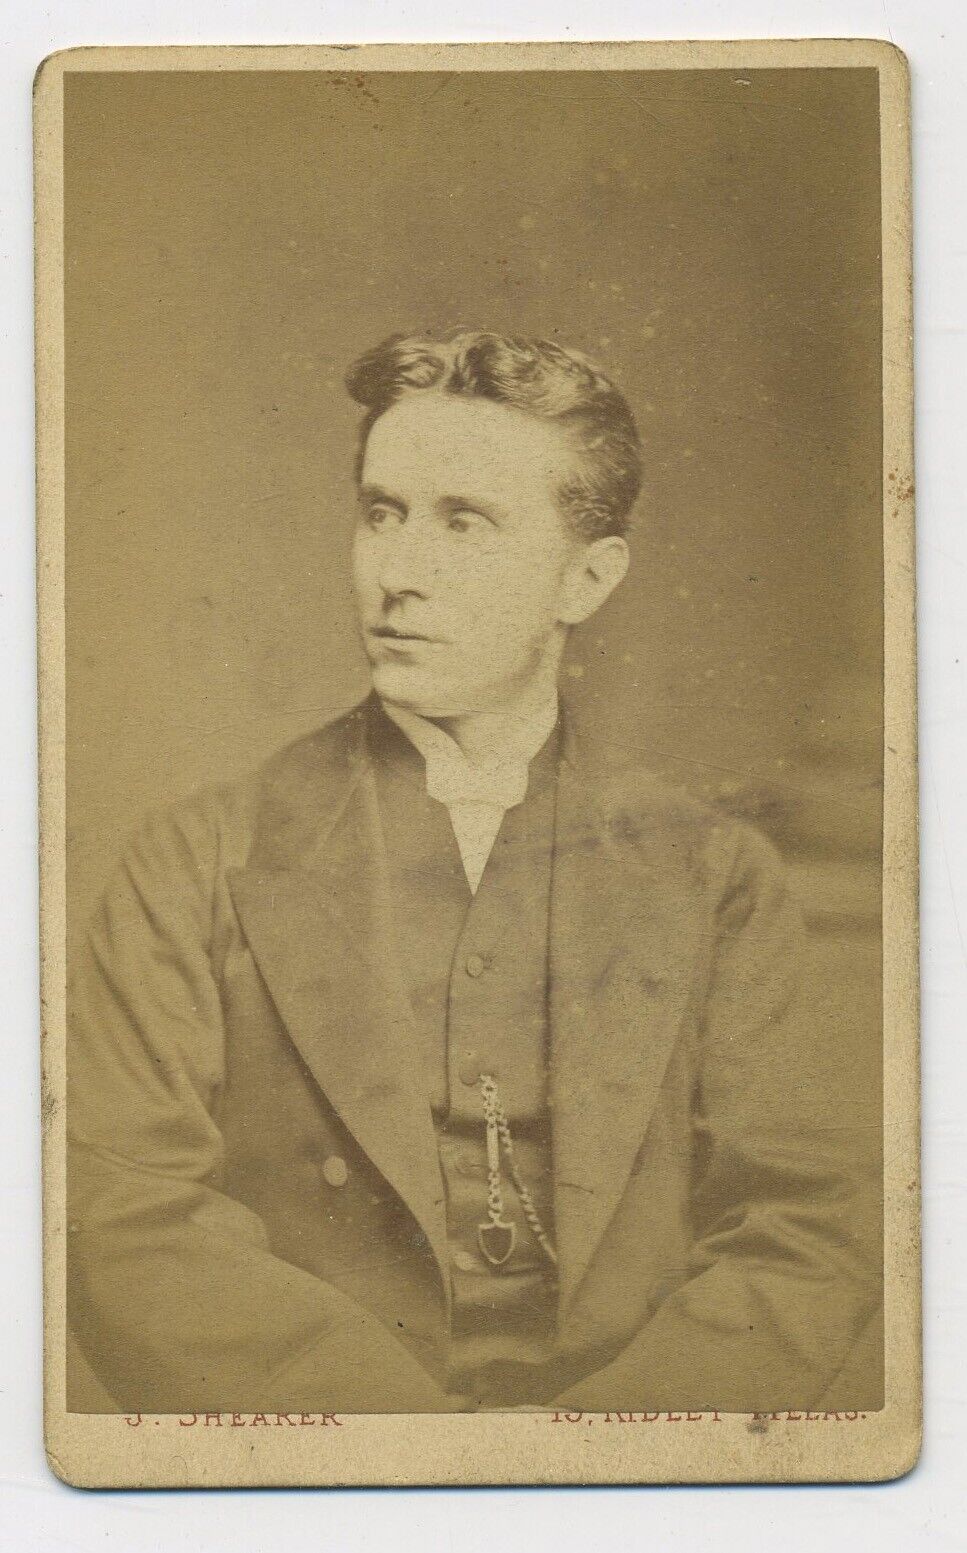 Portrait of Young Man by Shearer Newcastle on Tyne Antique CDV Photograph P1